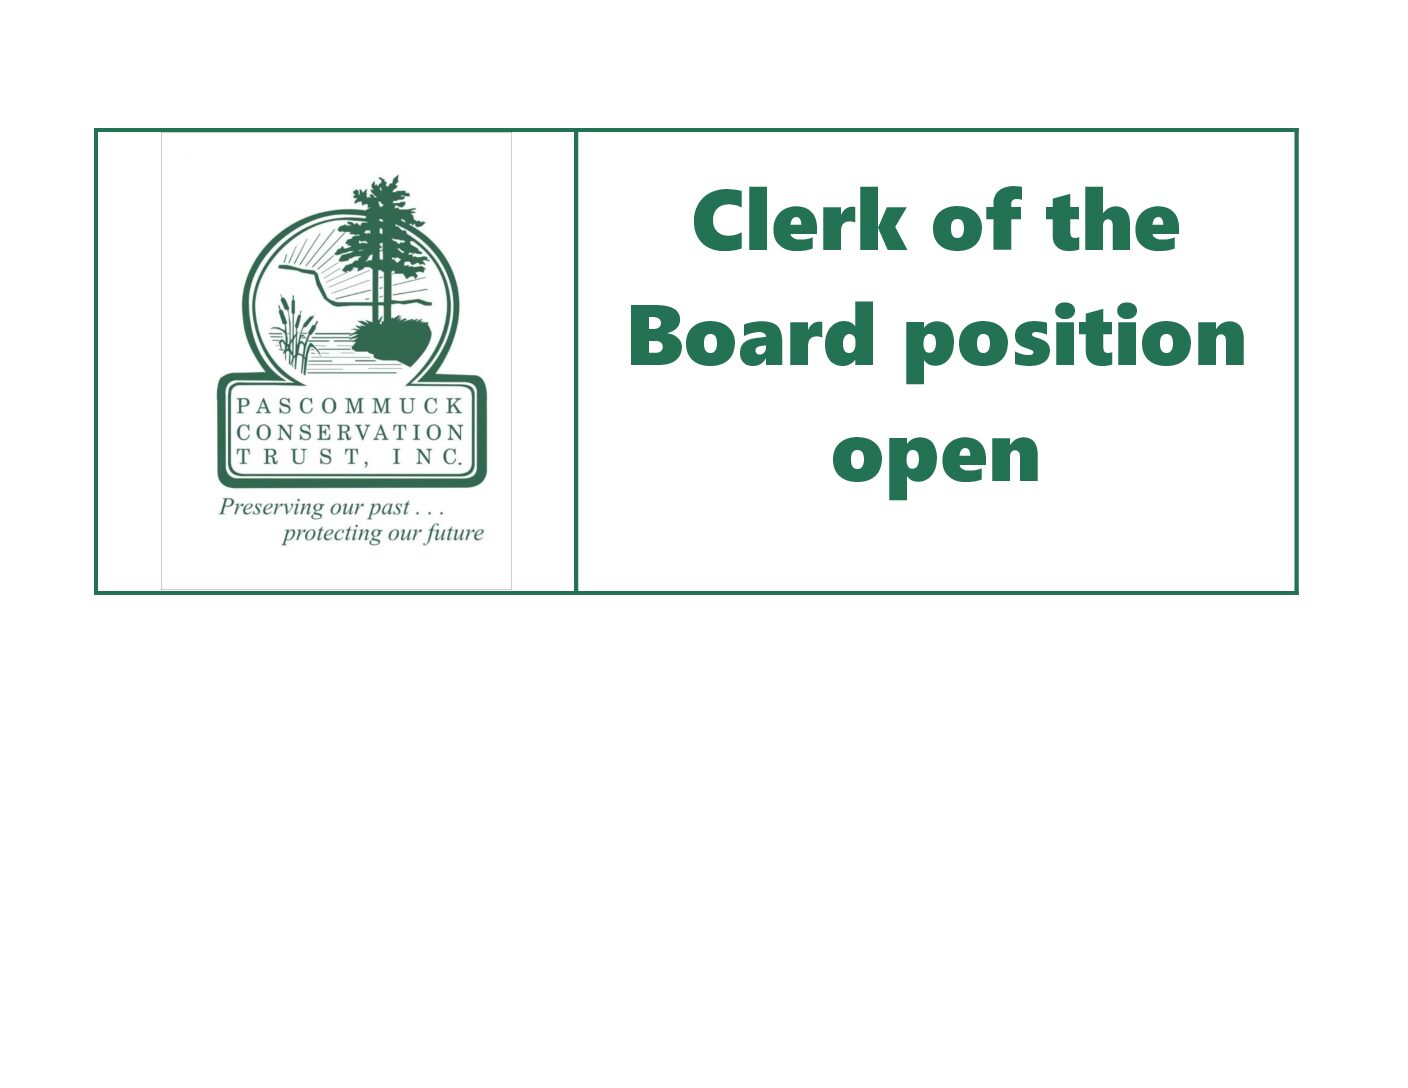 PCT Clerk of the Board position open.